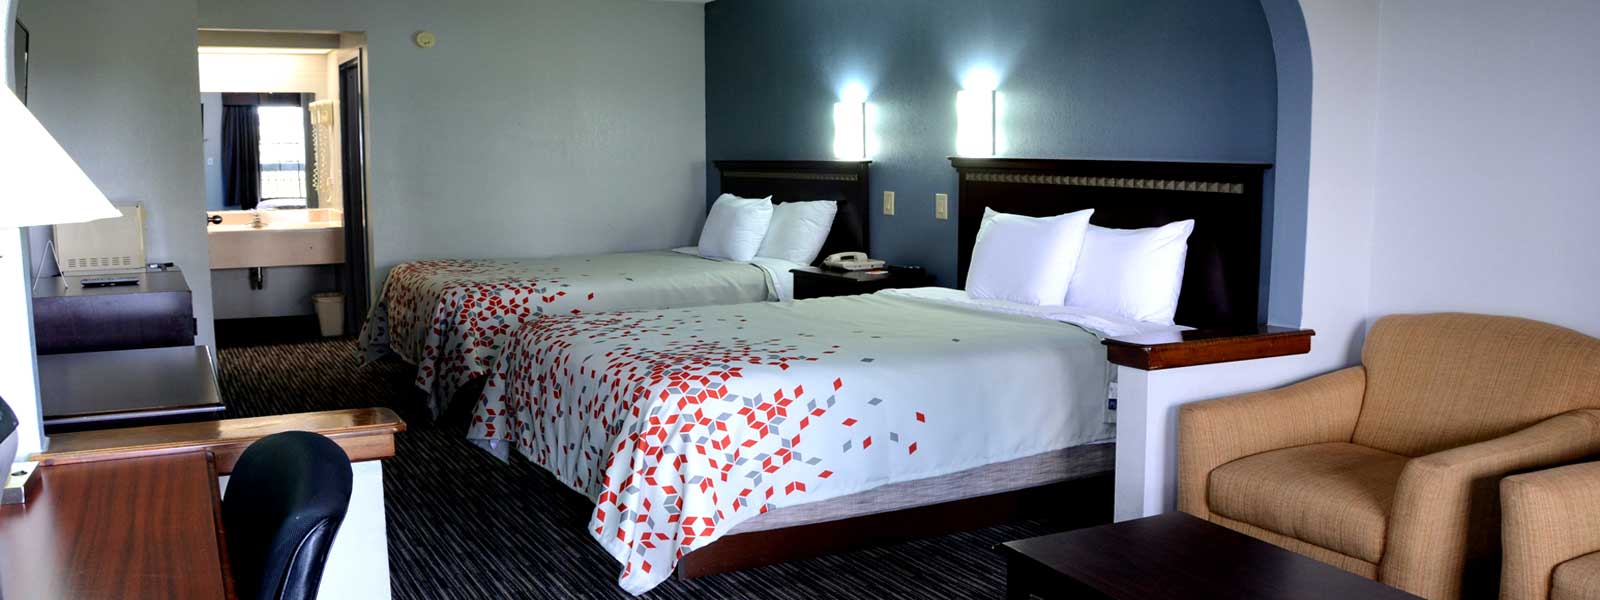 Gateway Inn and Suites Affordable Clean Comfortable Rooms Newly Remodeled Close to Downtown